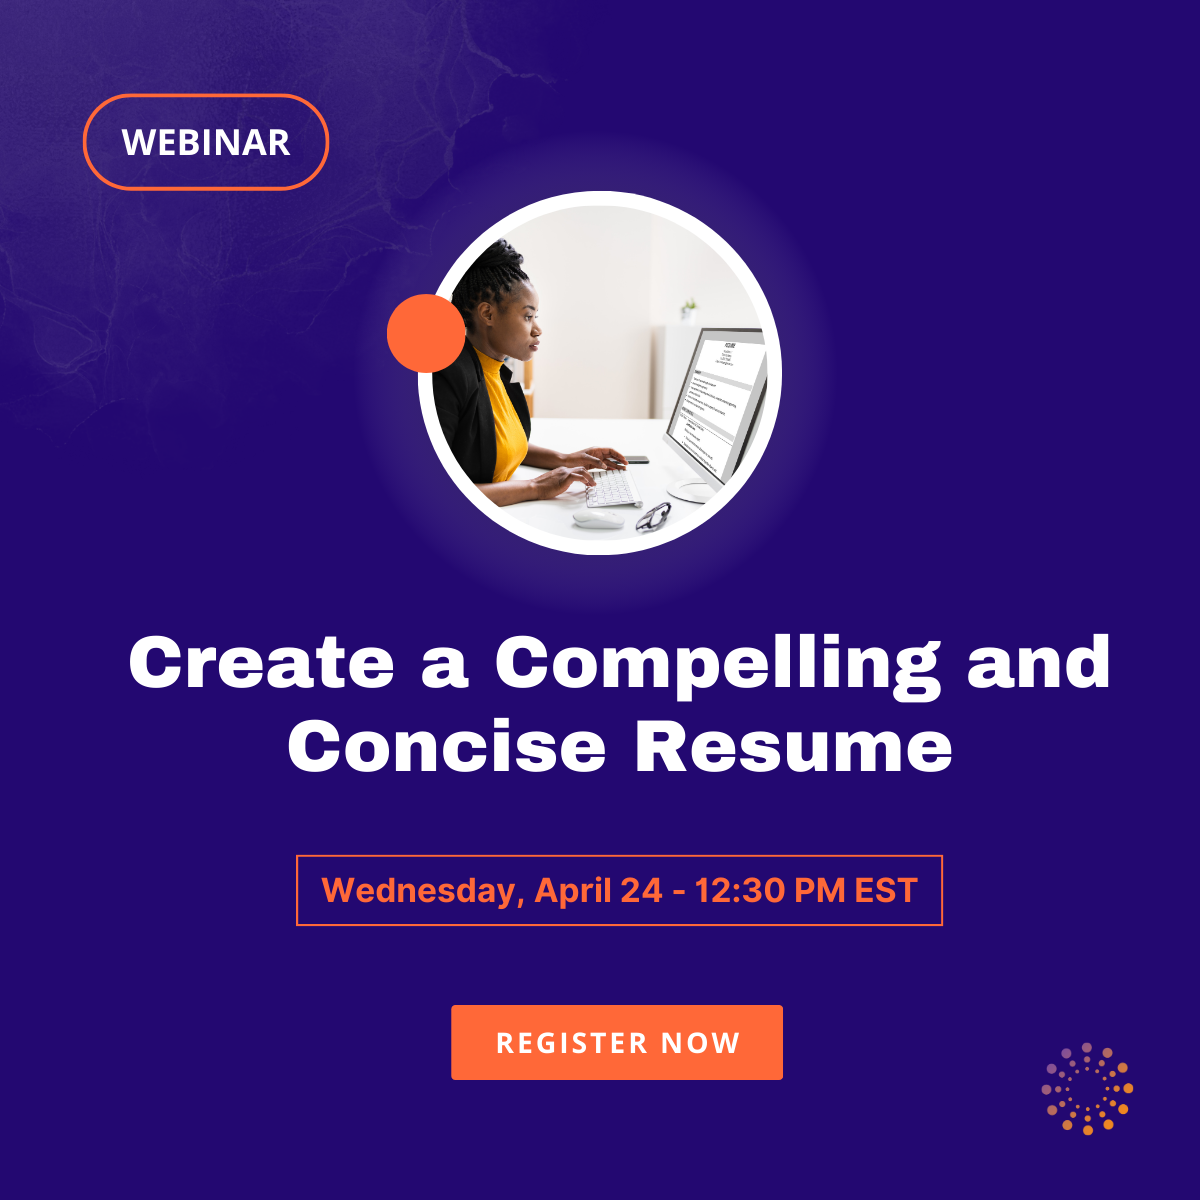 Promo image encouraging audience to join the Create a compelling and concise resume webinar